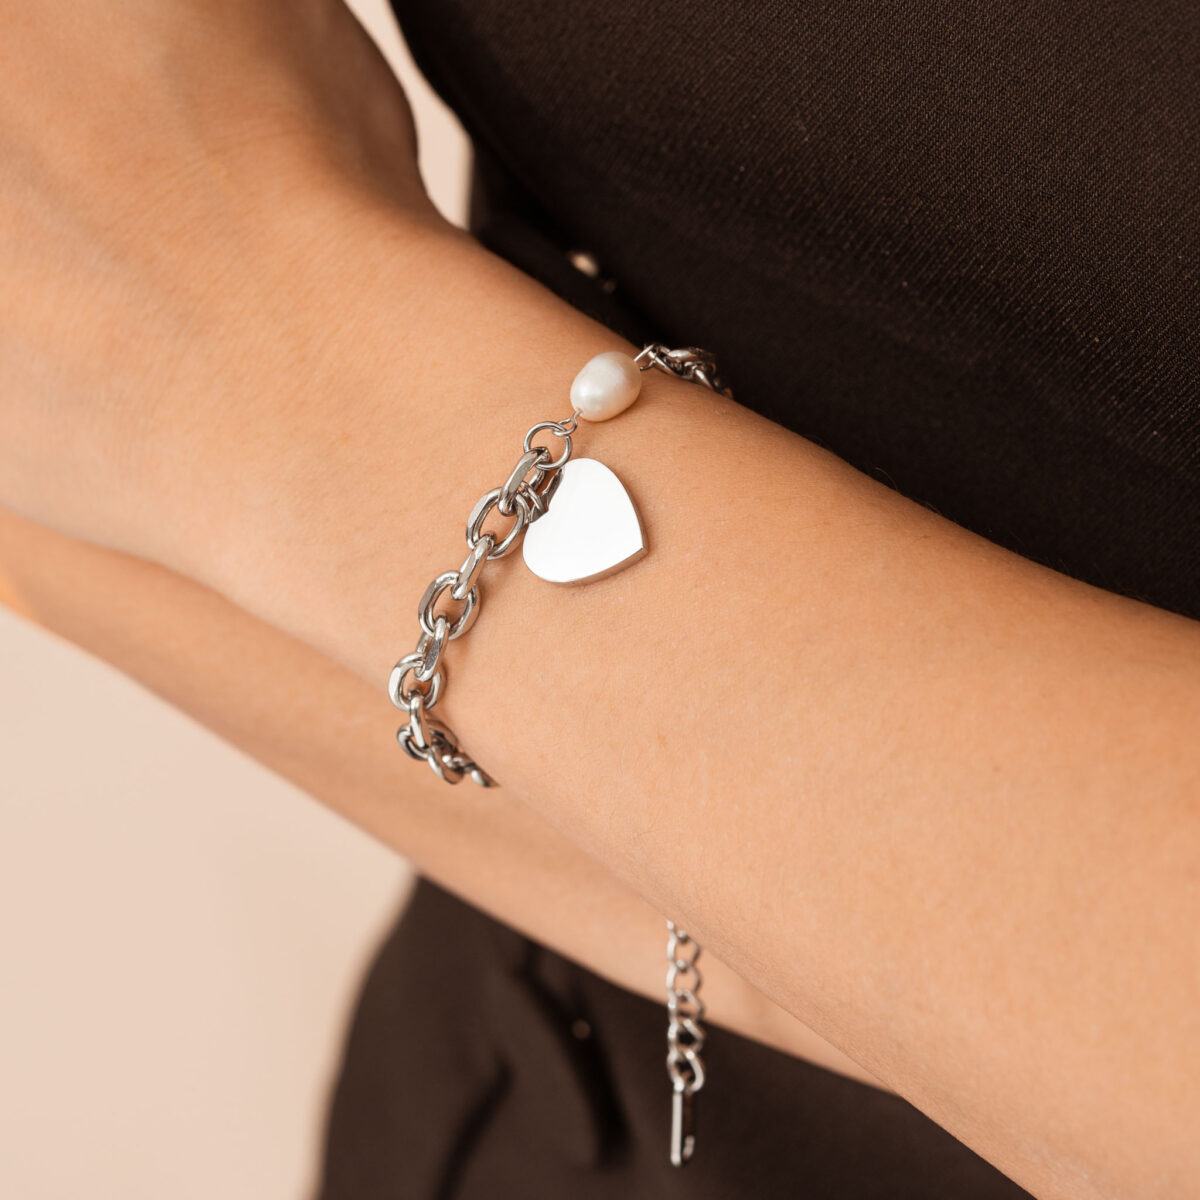 https://m.clubbella.co/product/agate-silver-heart-charm-bracelet/ Agate Silver Heart Charm Bracelet (1)